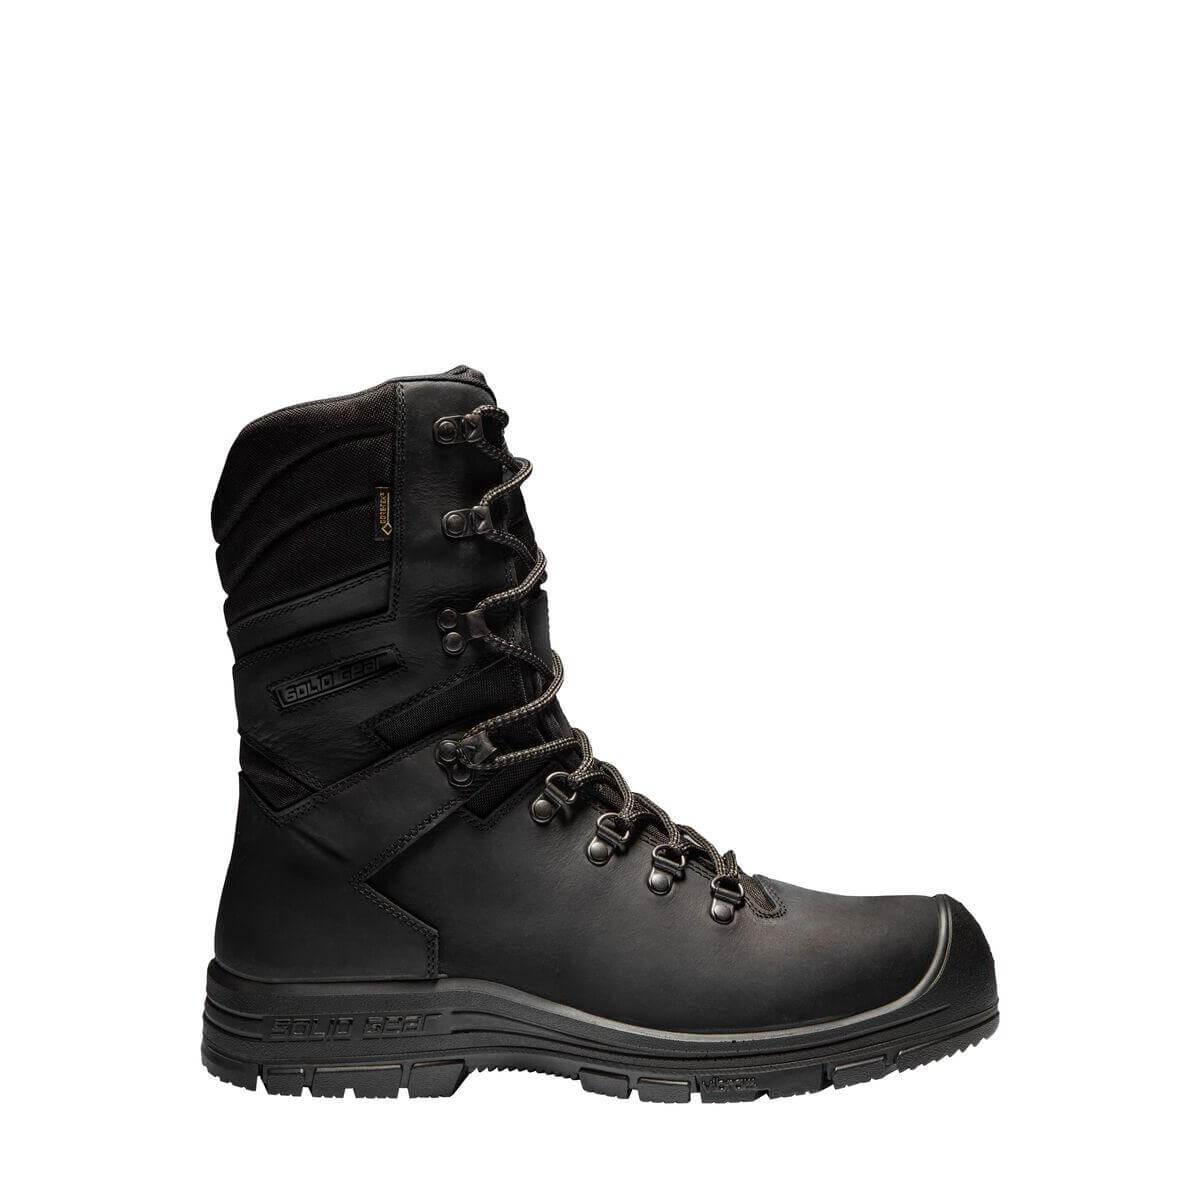 Solid Gear by Snickers 75001 Delta GTX High Leg Side Zip Premium Leather Gore Tex Waterproof Wool Lined Winter S3 Safety Boots Black 01 #colour_black